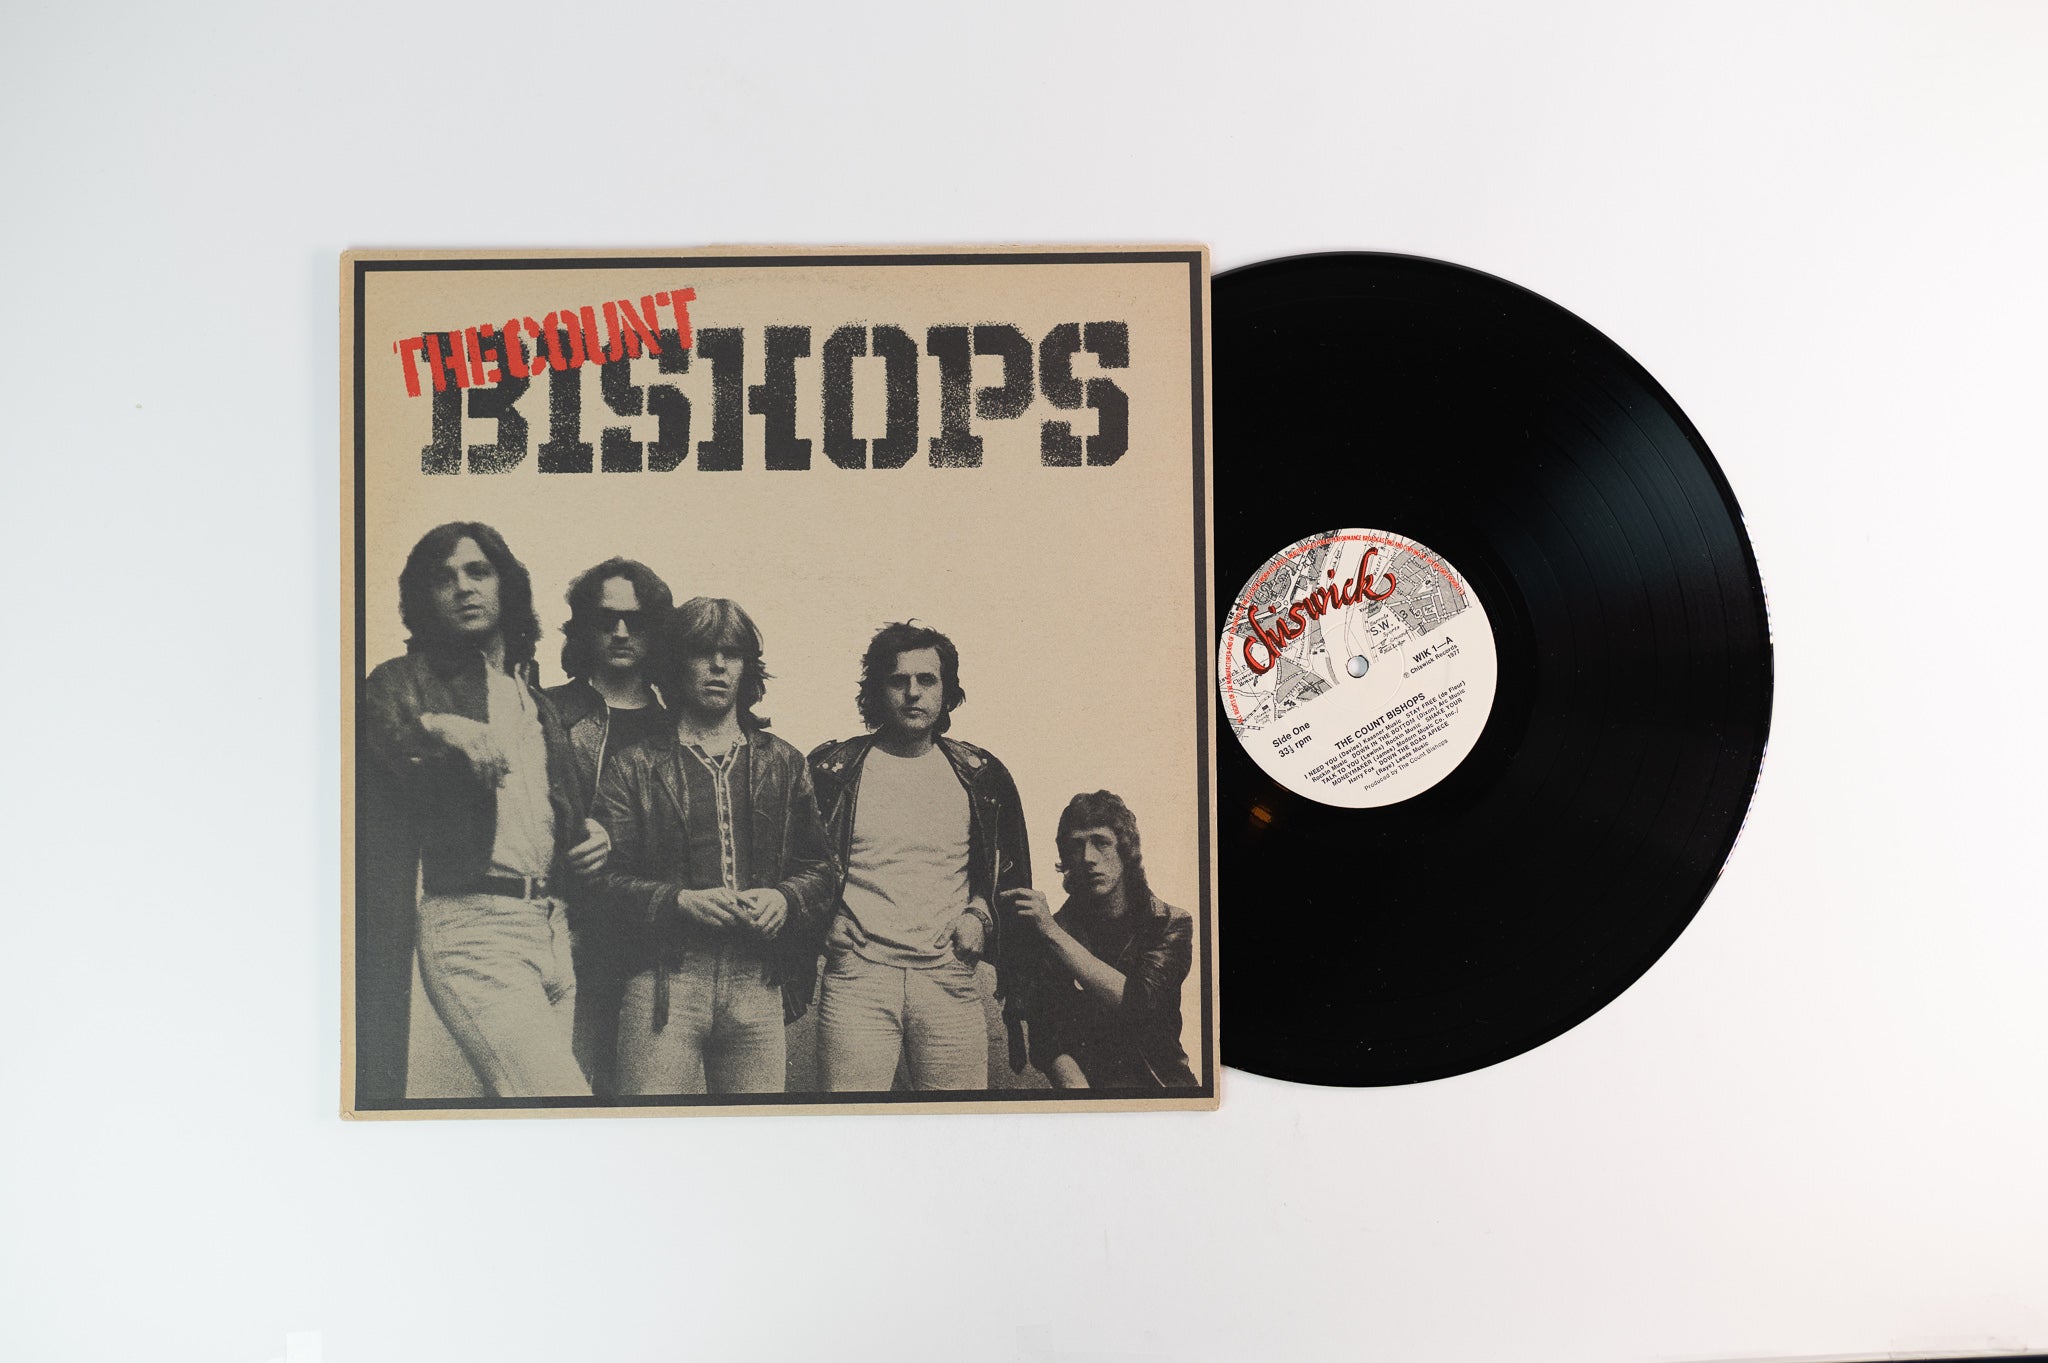 The Count Bishops - The Count Bishops on Chiswick Records - UK pressing